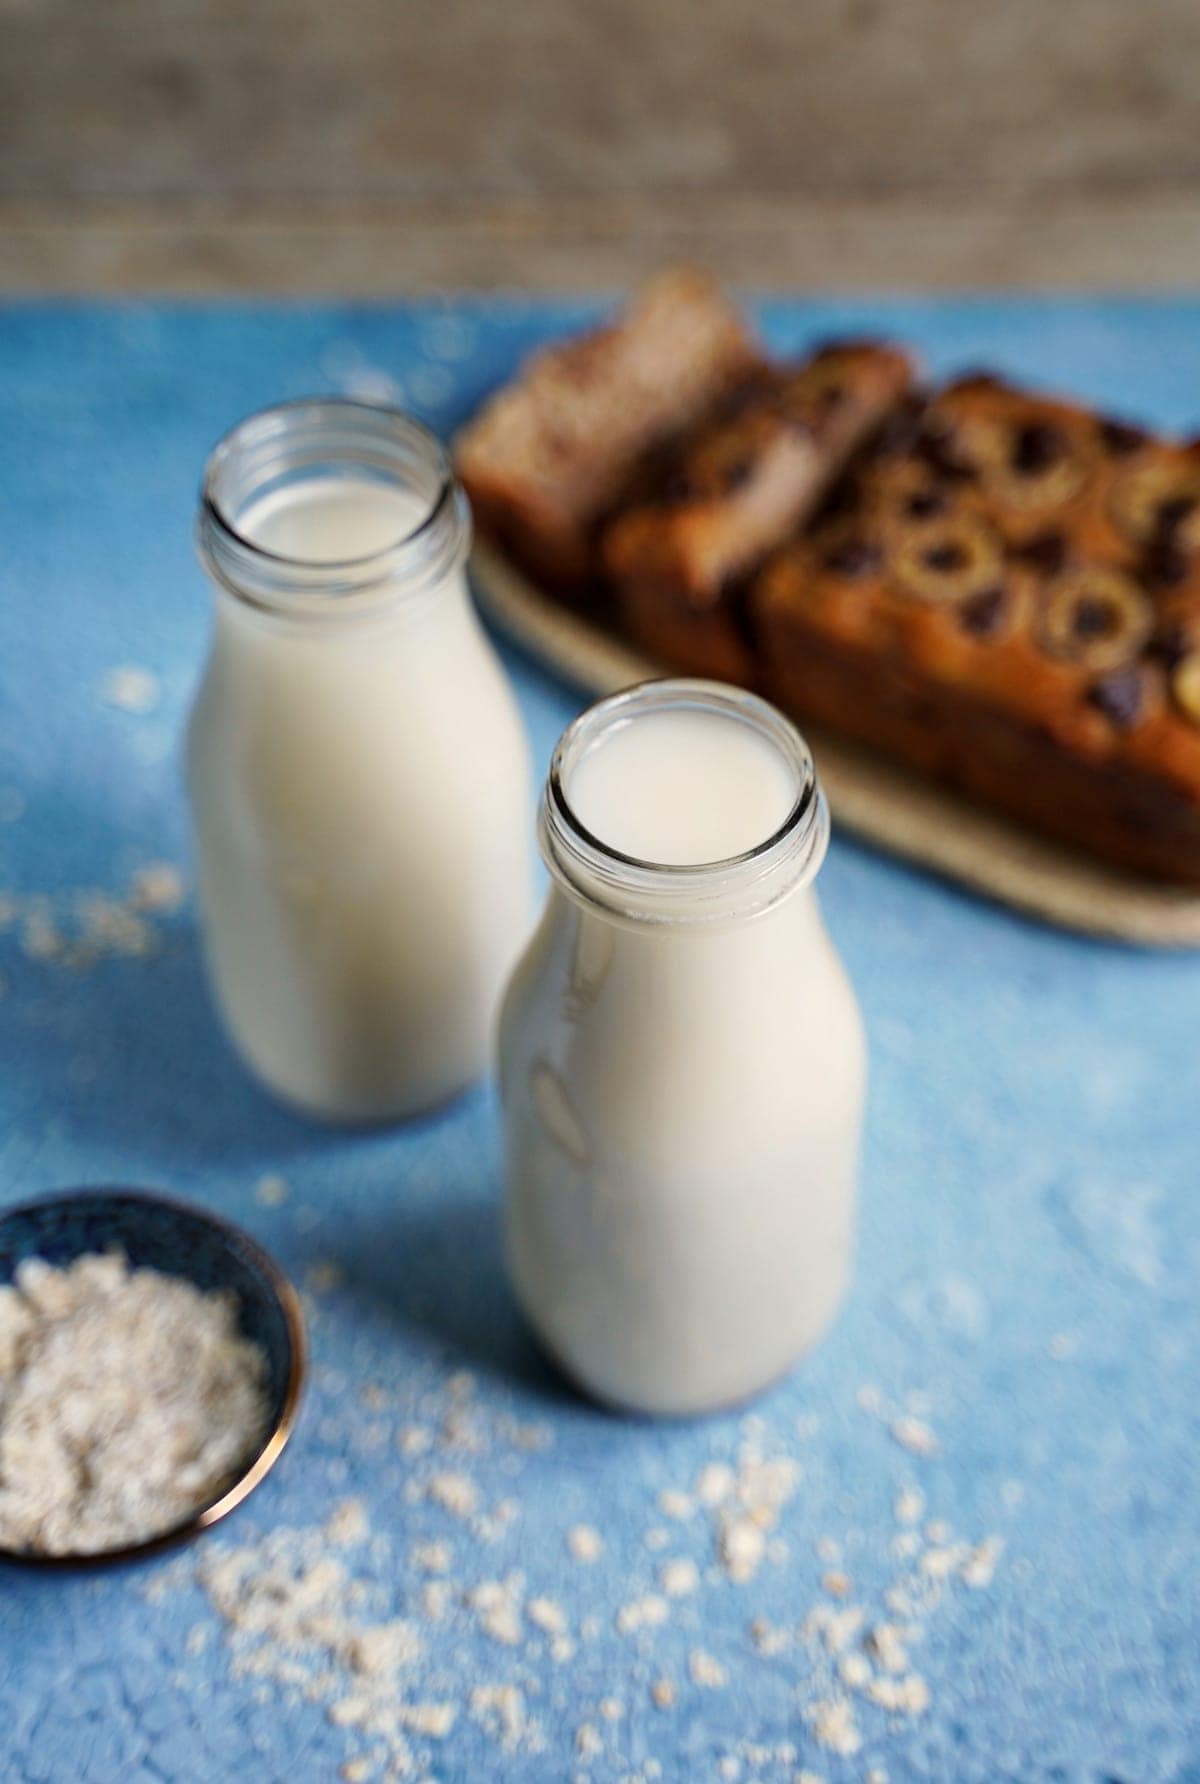 dairy-free mylk in 2 glass jars with banana bread